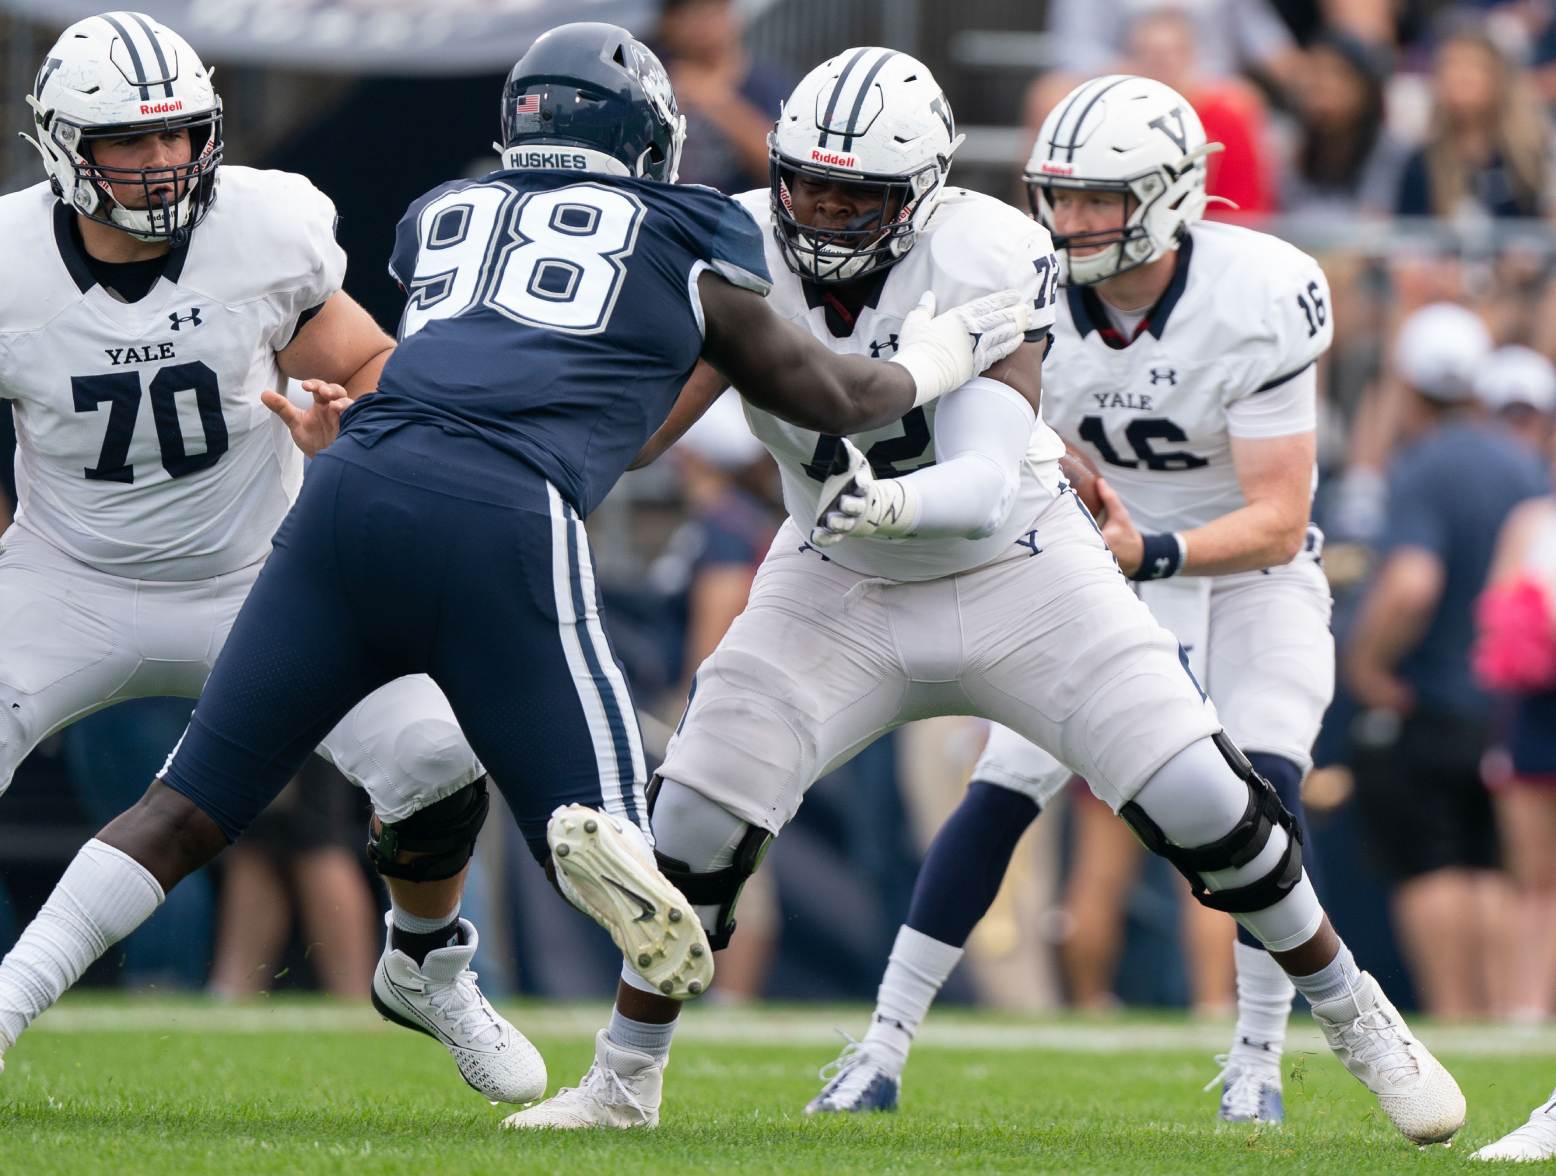 Oct 16, 2021; East Hartford, Connecticut, USA; Yale Bulldogs offensive lineman Kiran Amegadjie (72) blocks Connecticut Huskies defensive lineman Lwal Uguak (98) during the first half at Rentschler Field at Pratt & Whitney Stadium. Credit: Gregory Fisher-USA TODAY Sports